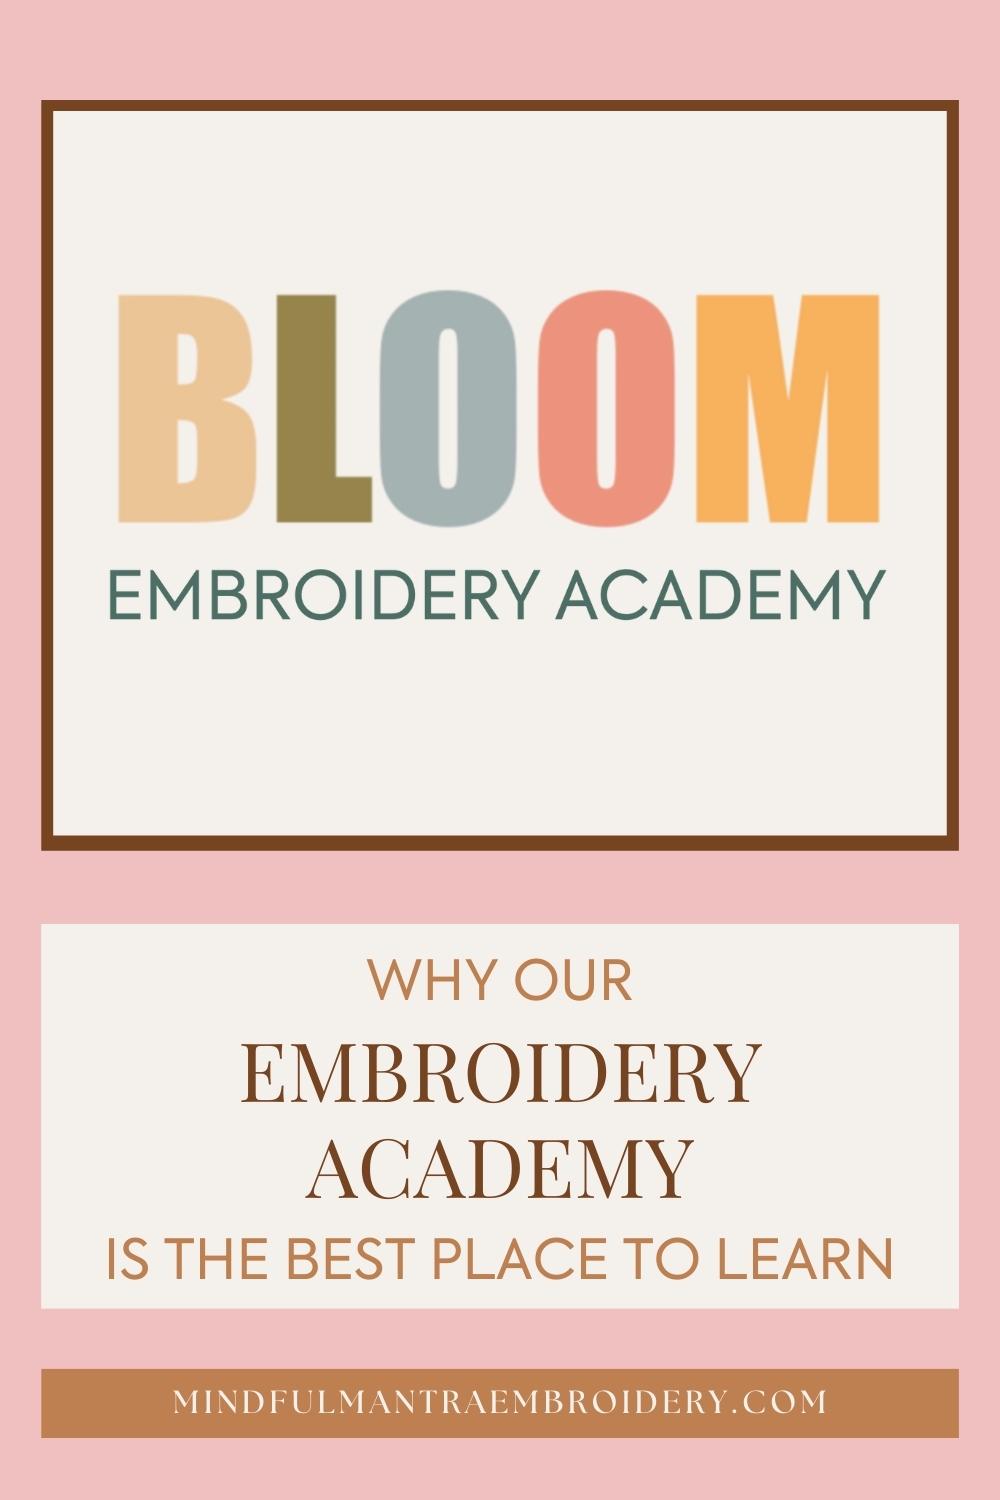 Why Our Embroidery Academy is the Best Place to Learn